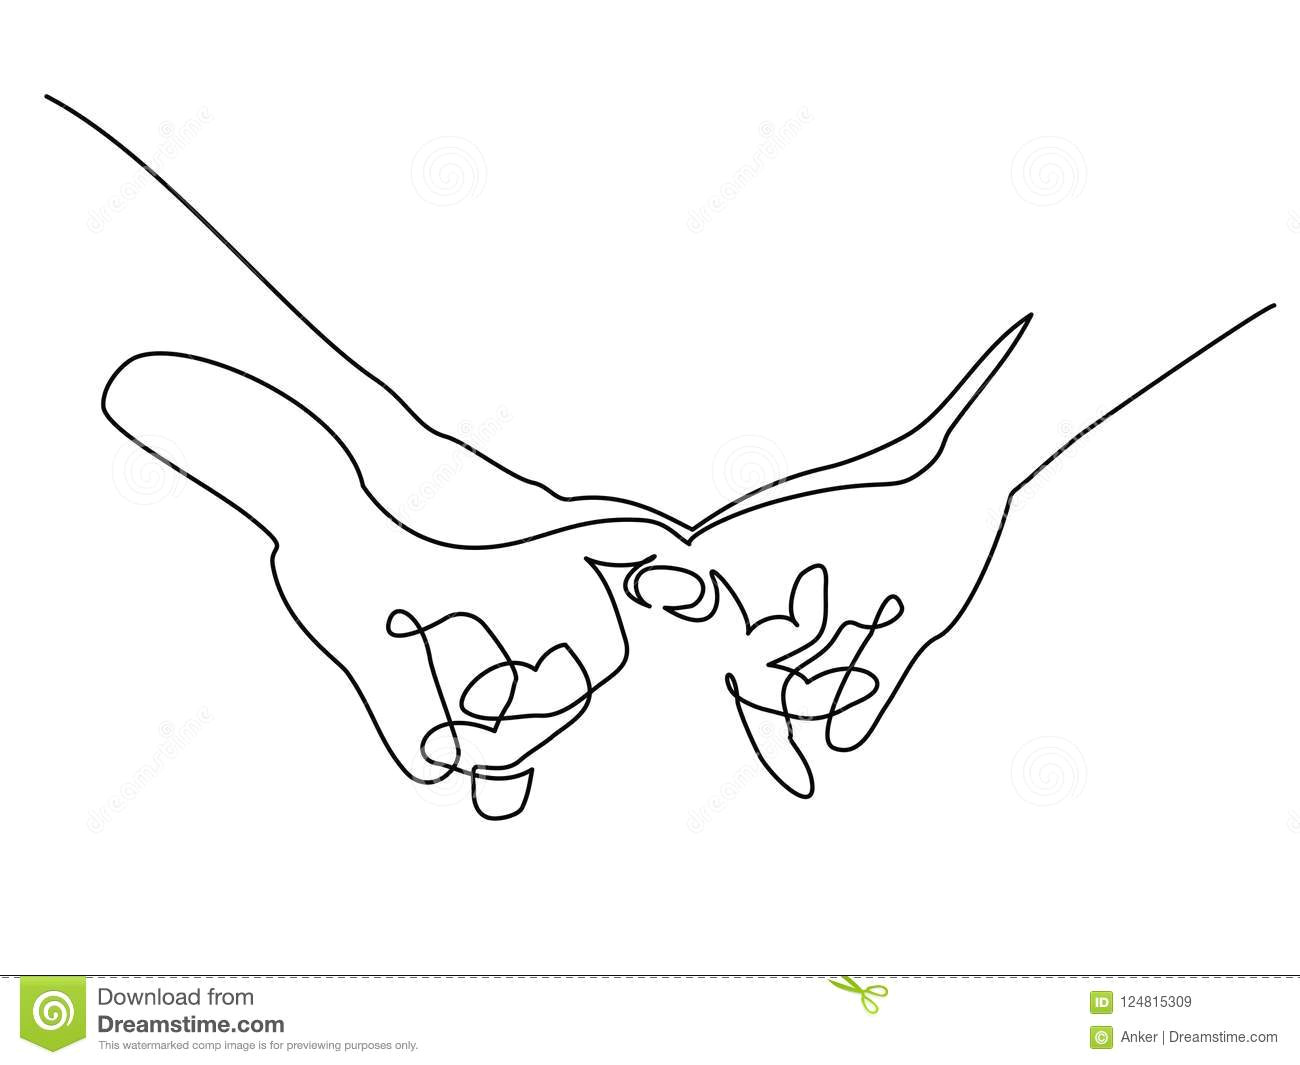 Drawing Of Hands forming A Heart Hands Woman and Man Holding together with Fingers Stock Vector